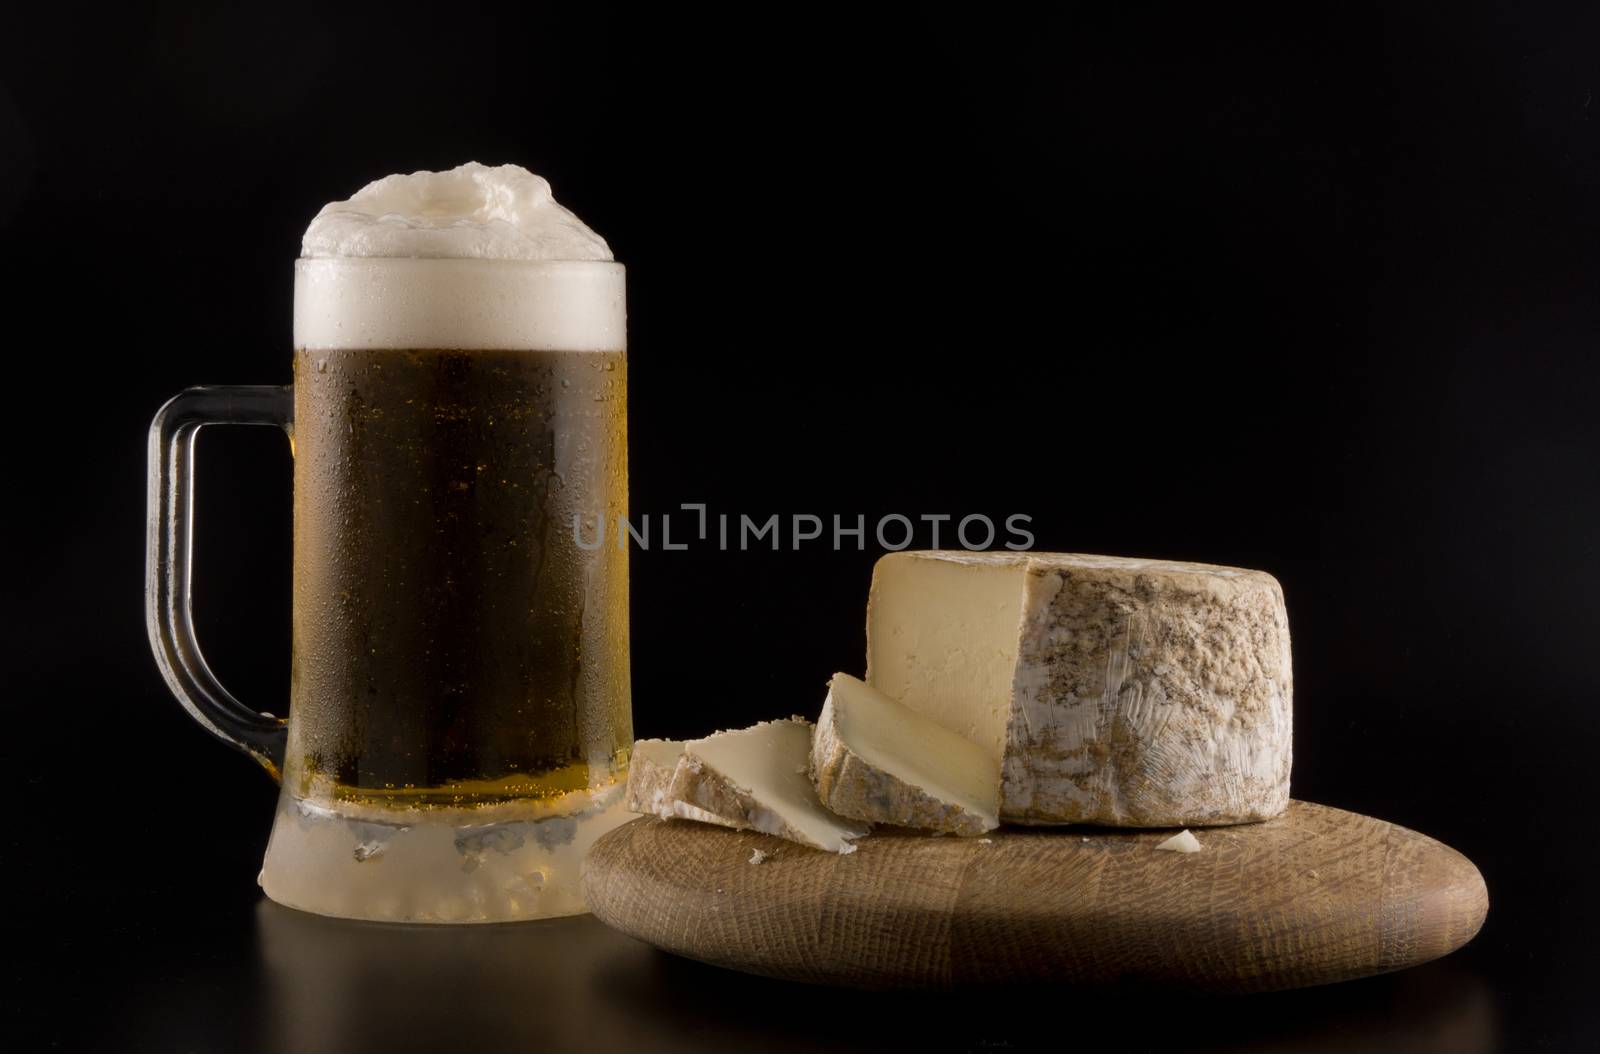 Foaming beer and cheese by photosil